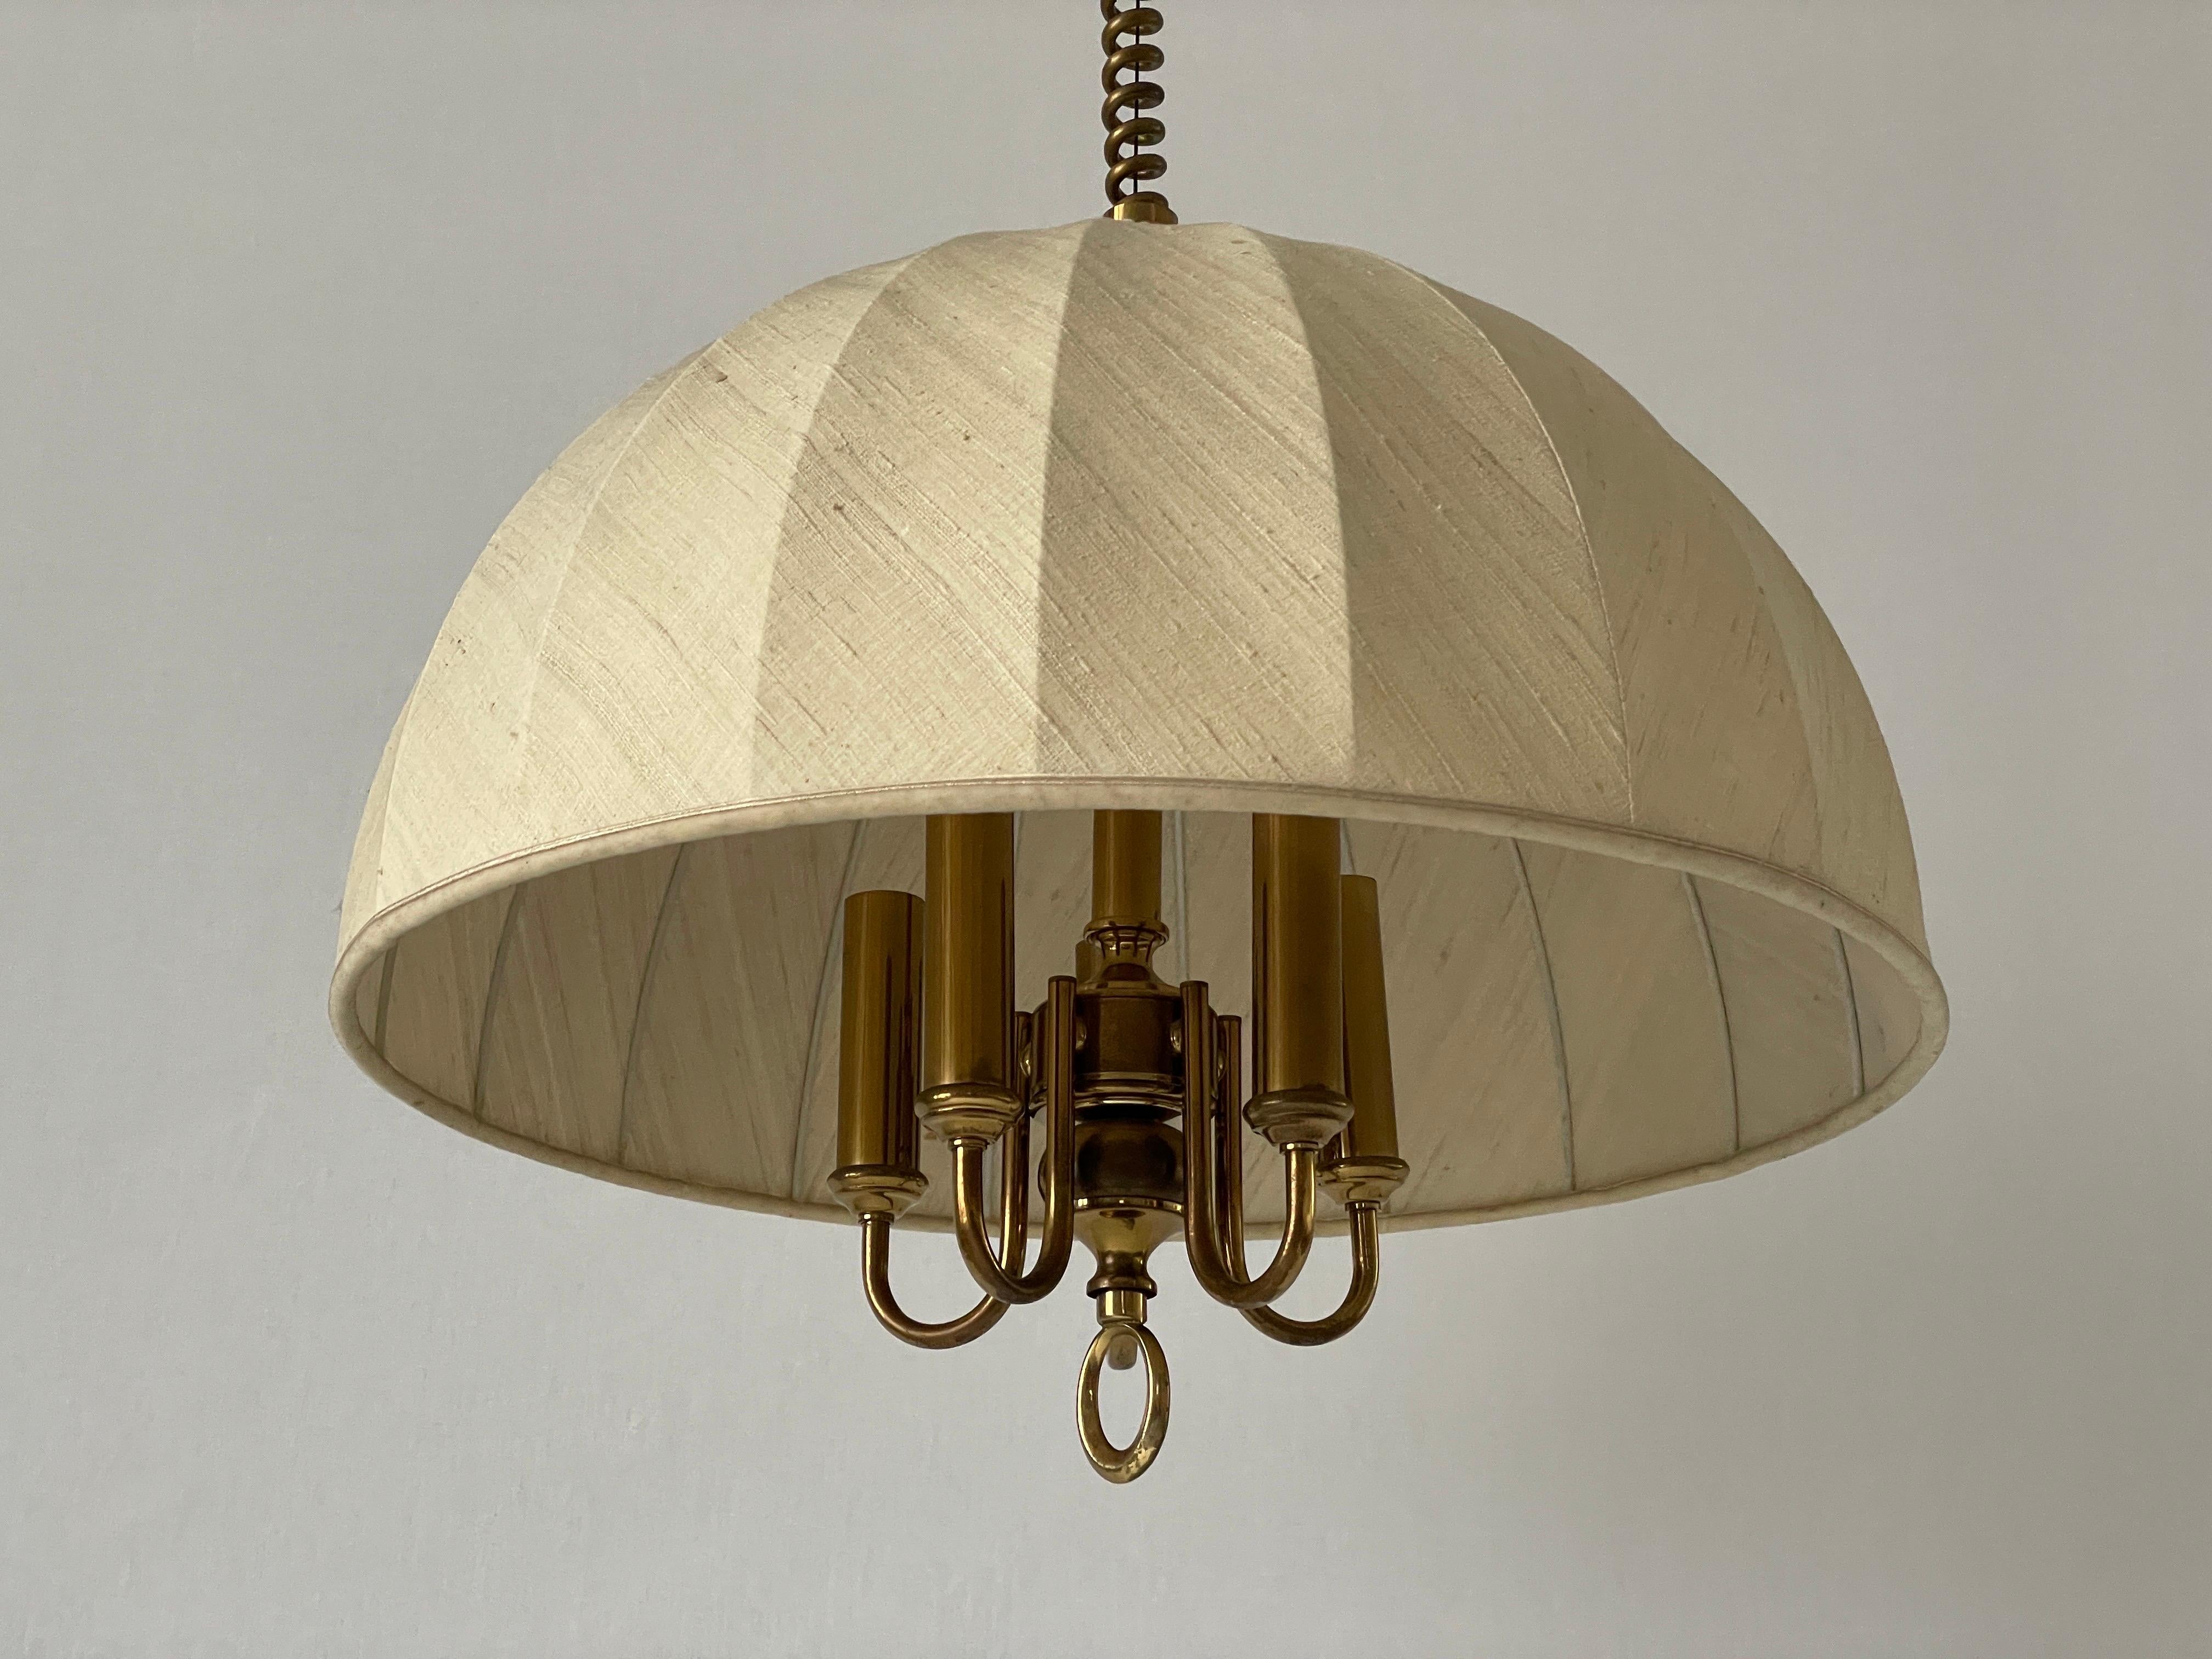 Beige Fabric and Brass 5 socket Adjustable Shade Mid-century Modern XL Pendant Lamp by WKR, 1970s, Germany

Adjustable large lampshade.

Brass body & fabric shade
Manufactured in Germany

This lamp works with 5 x E14 light bulbs.

Measures: 
Height